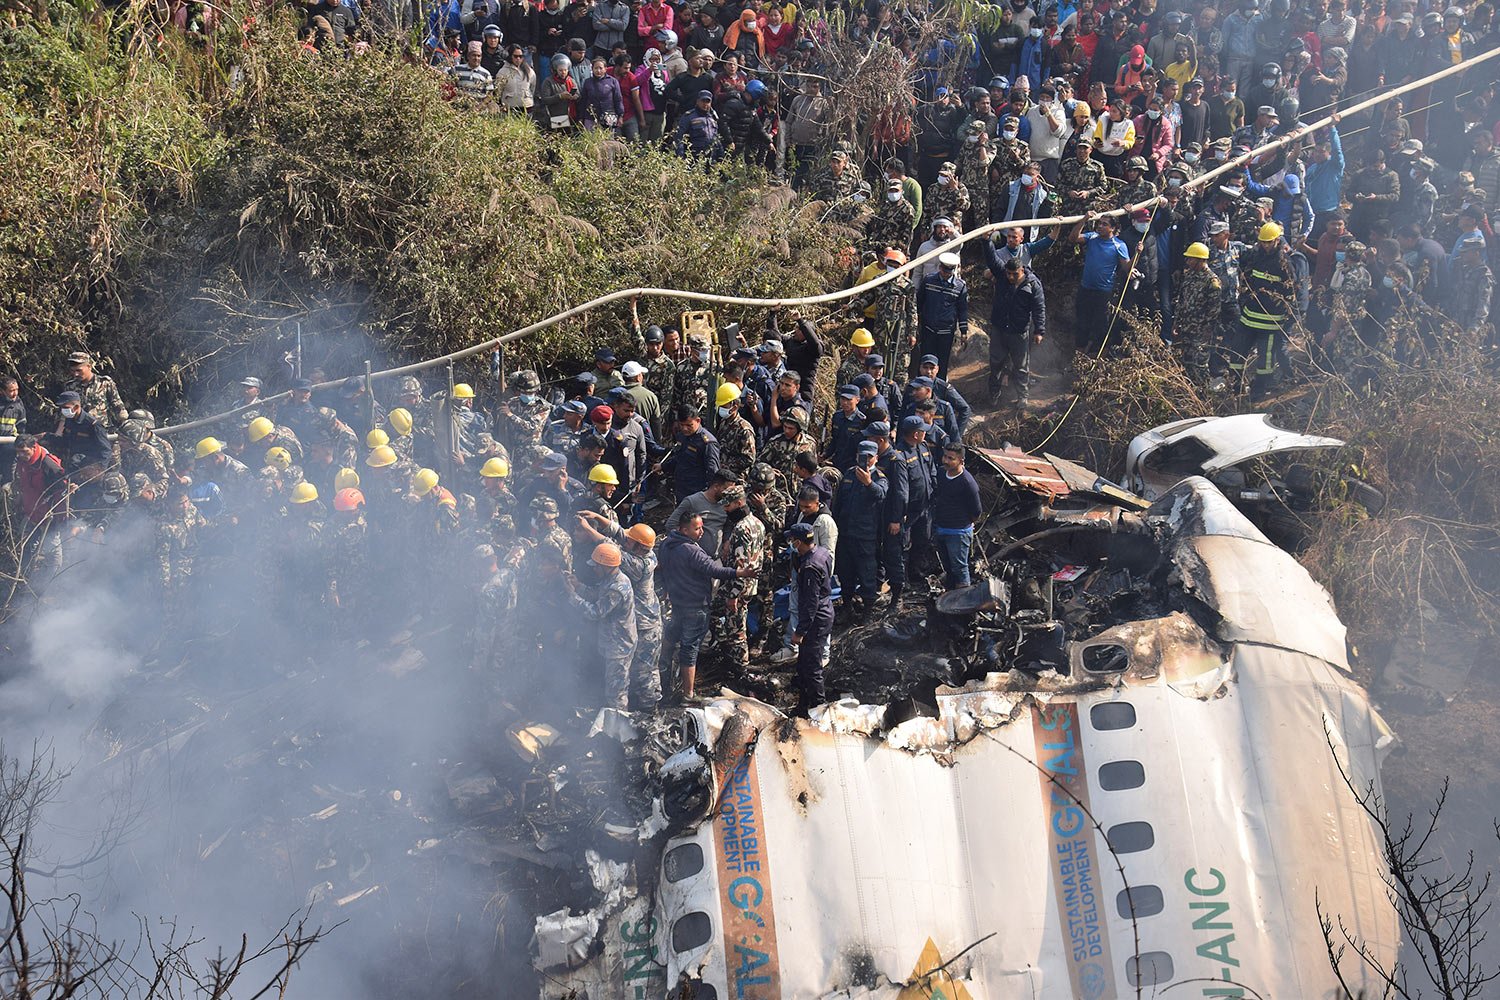  Nepalese rescue workers and civilians gather around the wreckage of a passenger plane that crashed in Pokhara, Nepal, Sunday, Jan. 15, 2023. (AP Photo/Krishna Mani Baral) 